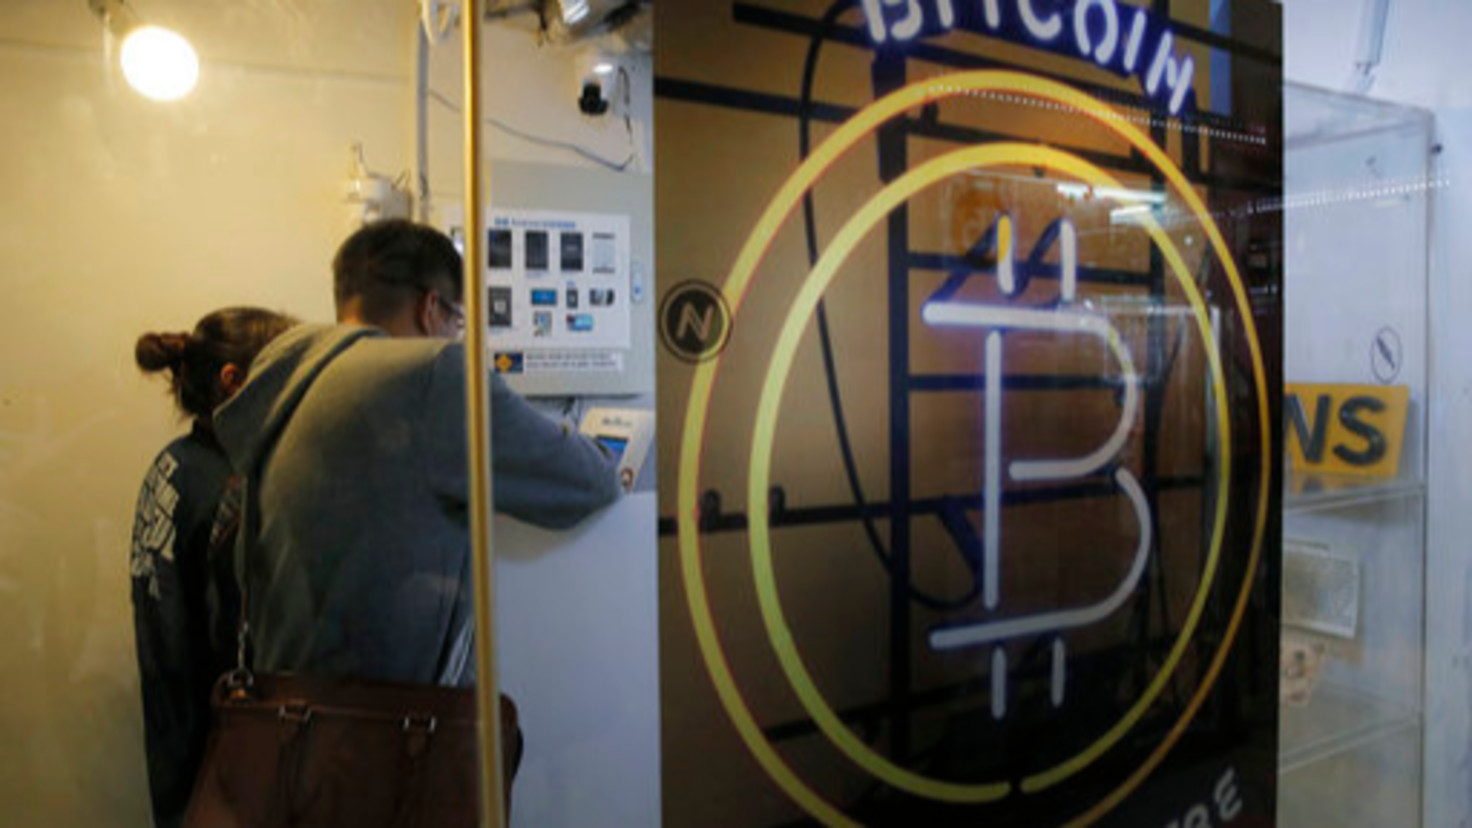 A bitcoin symbol on a glass-fronted business